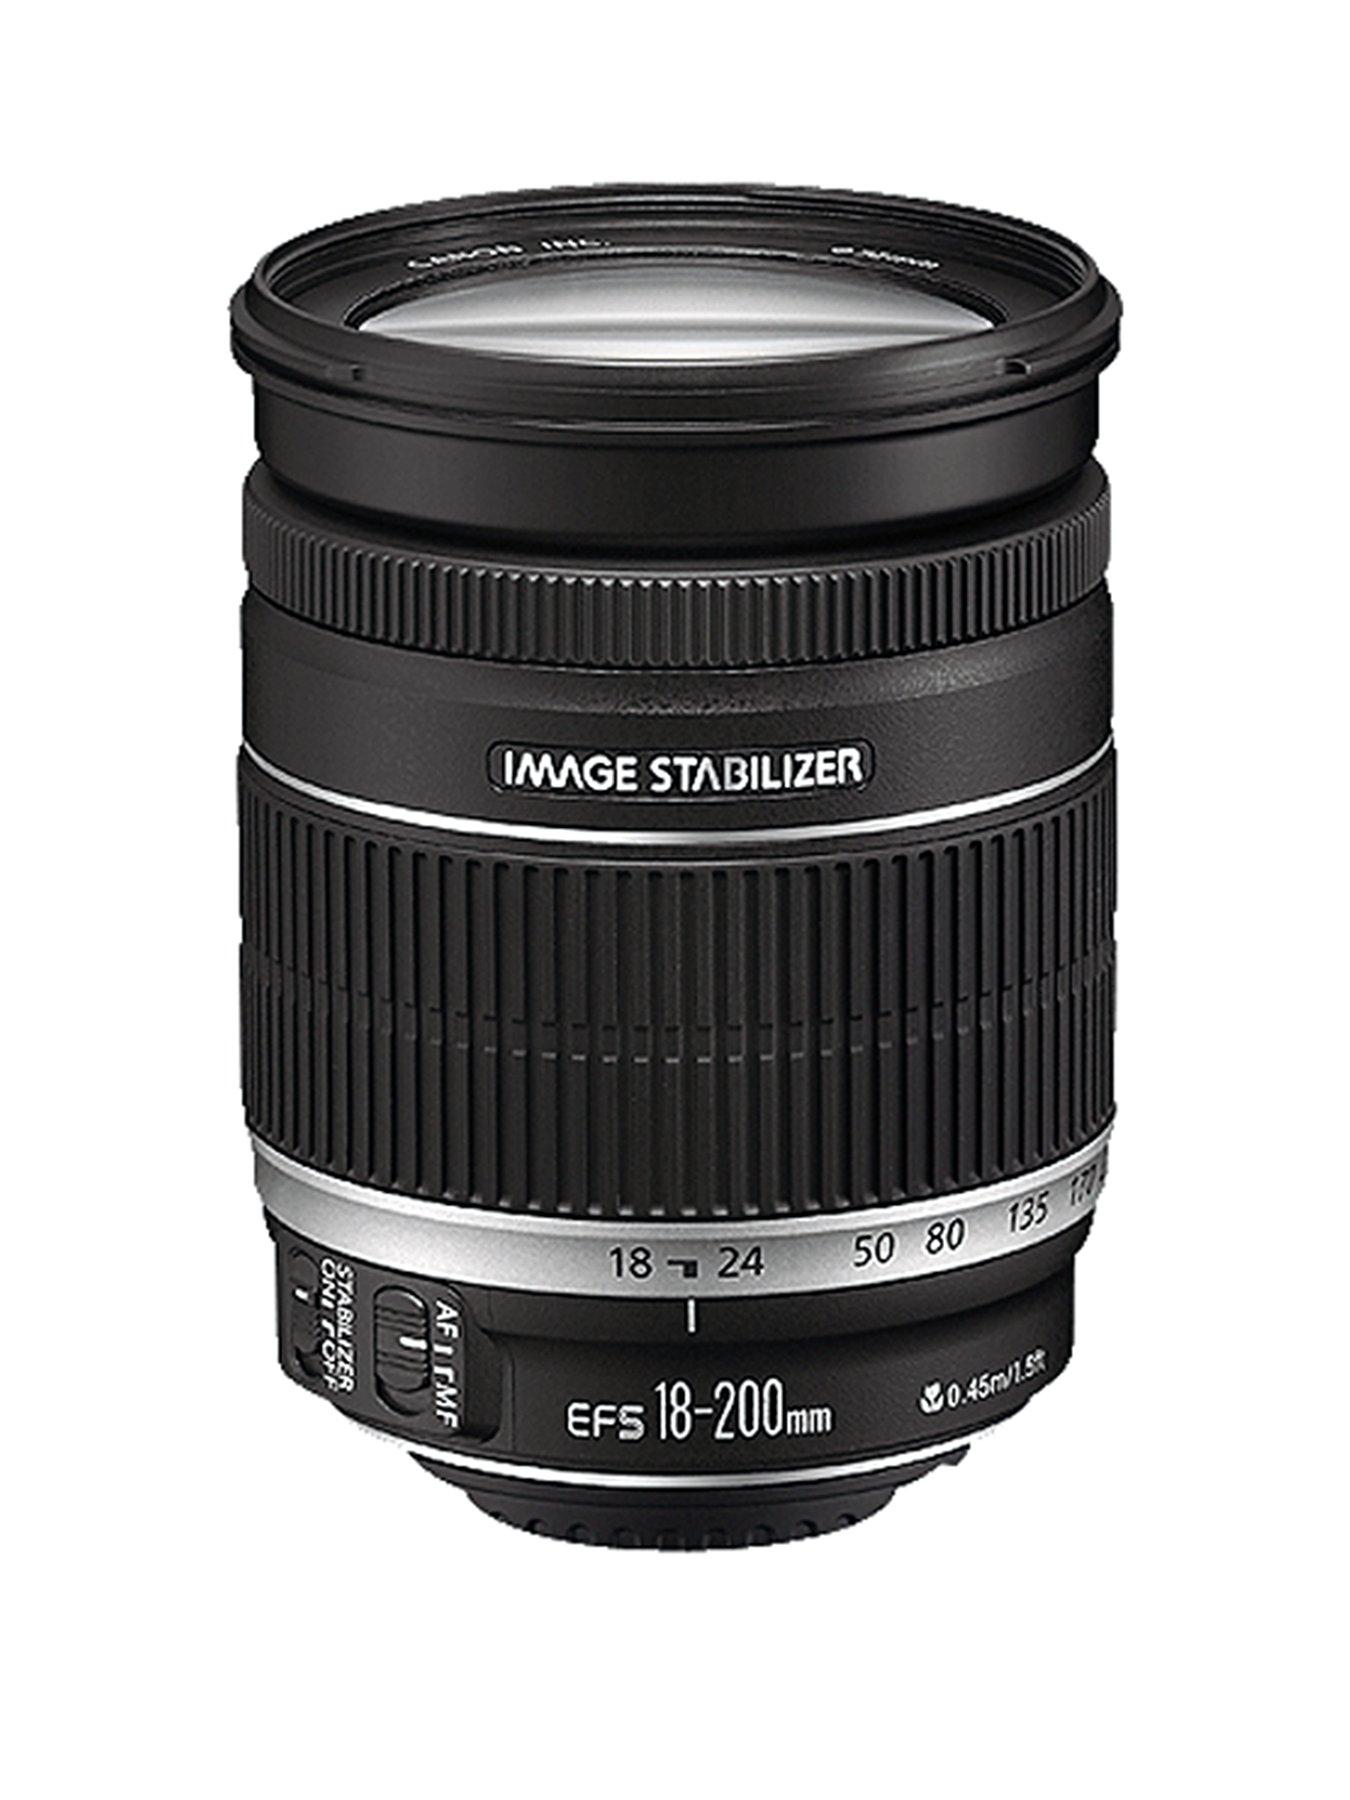 Canon Ef-S 18-200Mm F/3.5-5.6 Is Lens